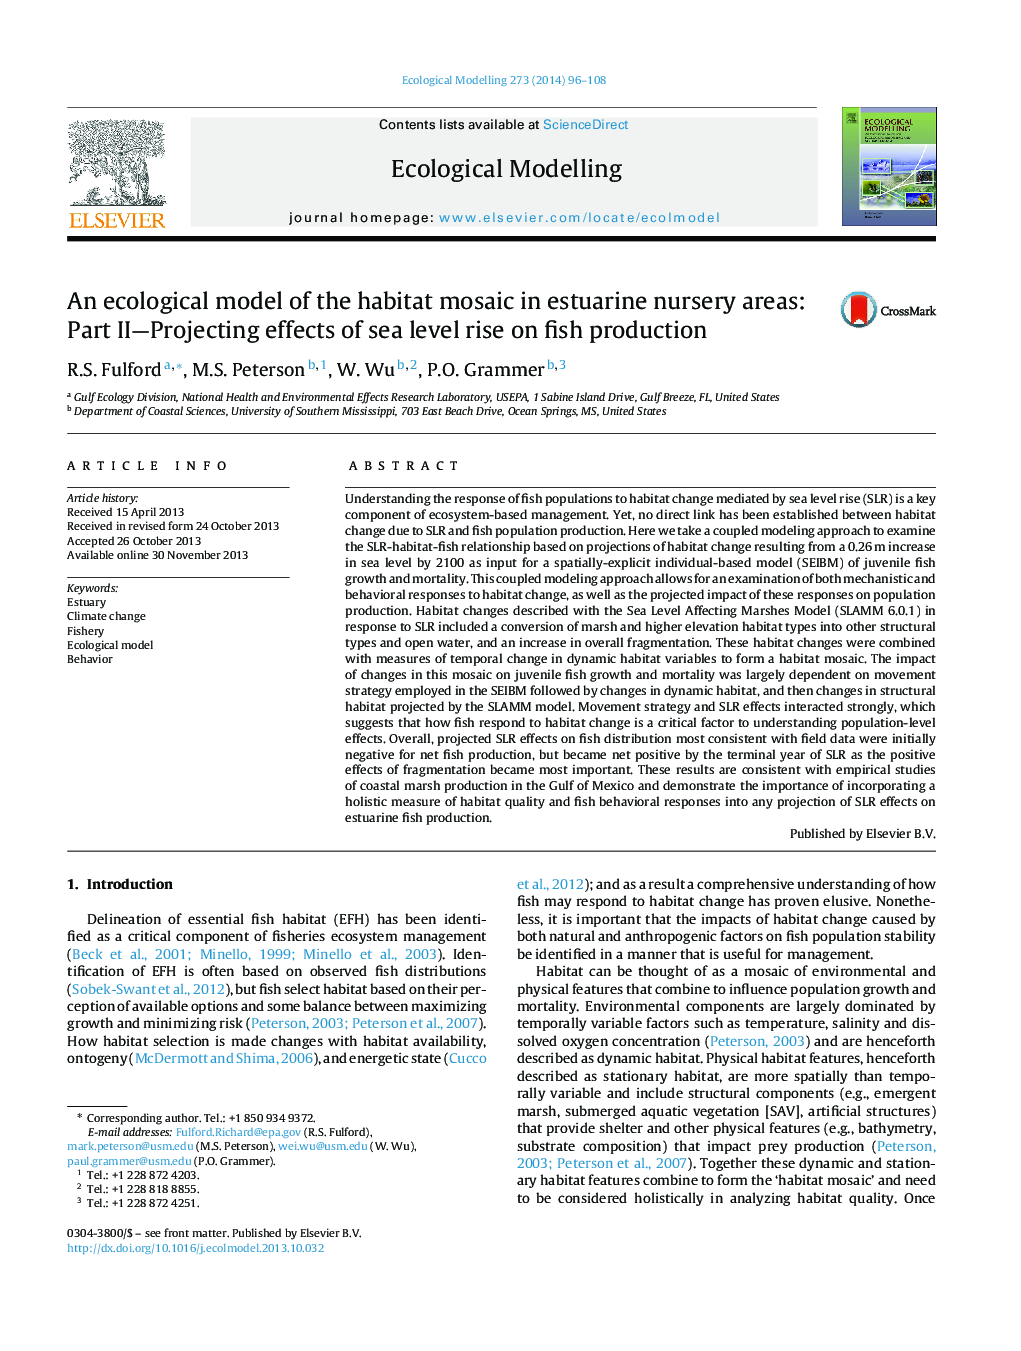 An ecological model of the habitat mosaic in estuarine nursery areas: Part II-Projecting effects of sea level rise on fish production